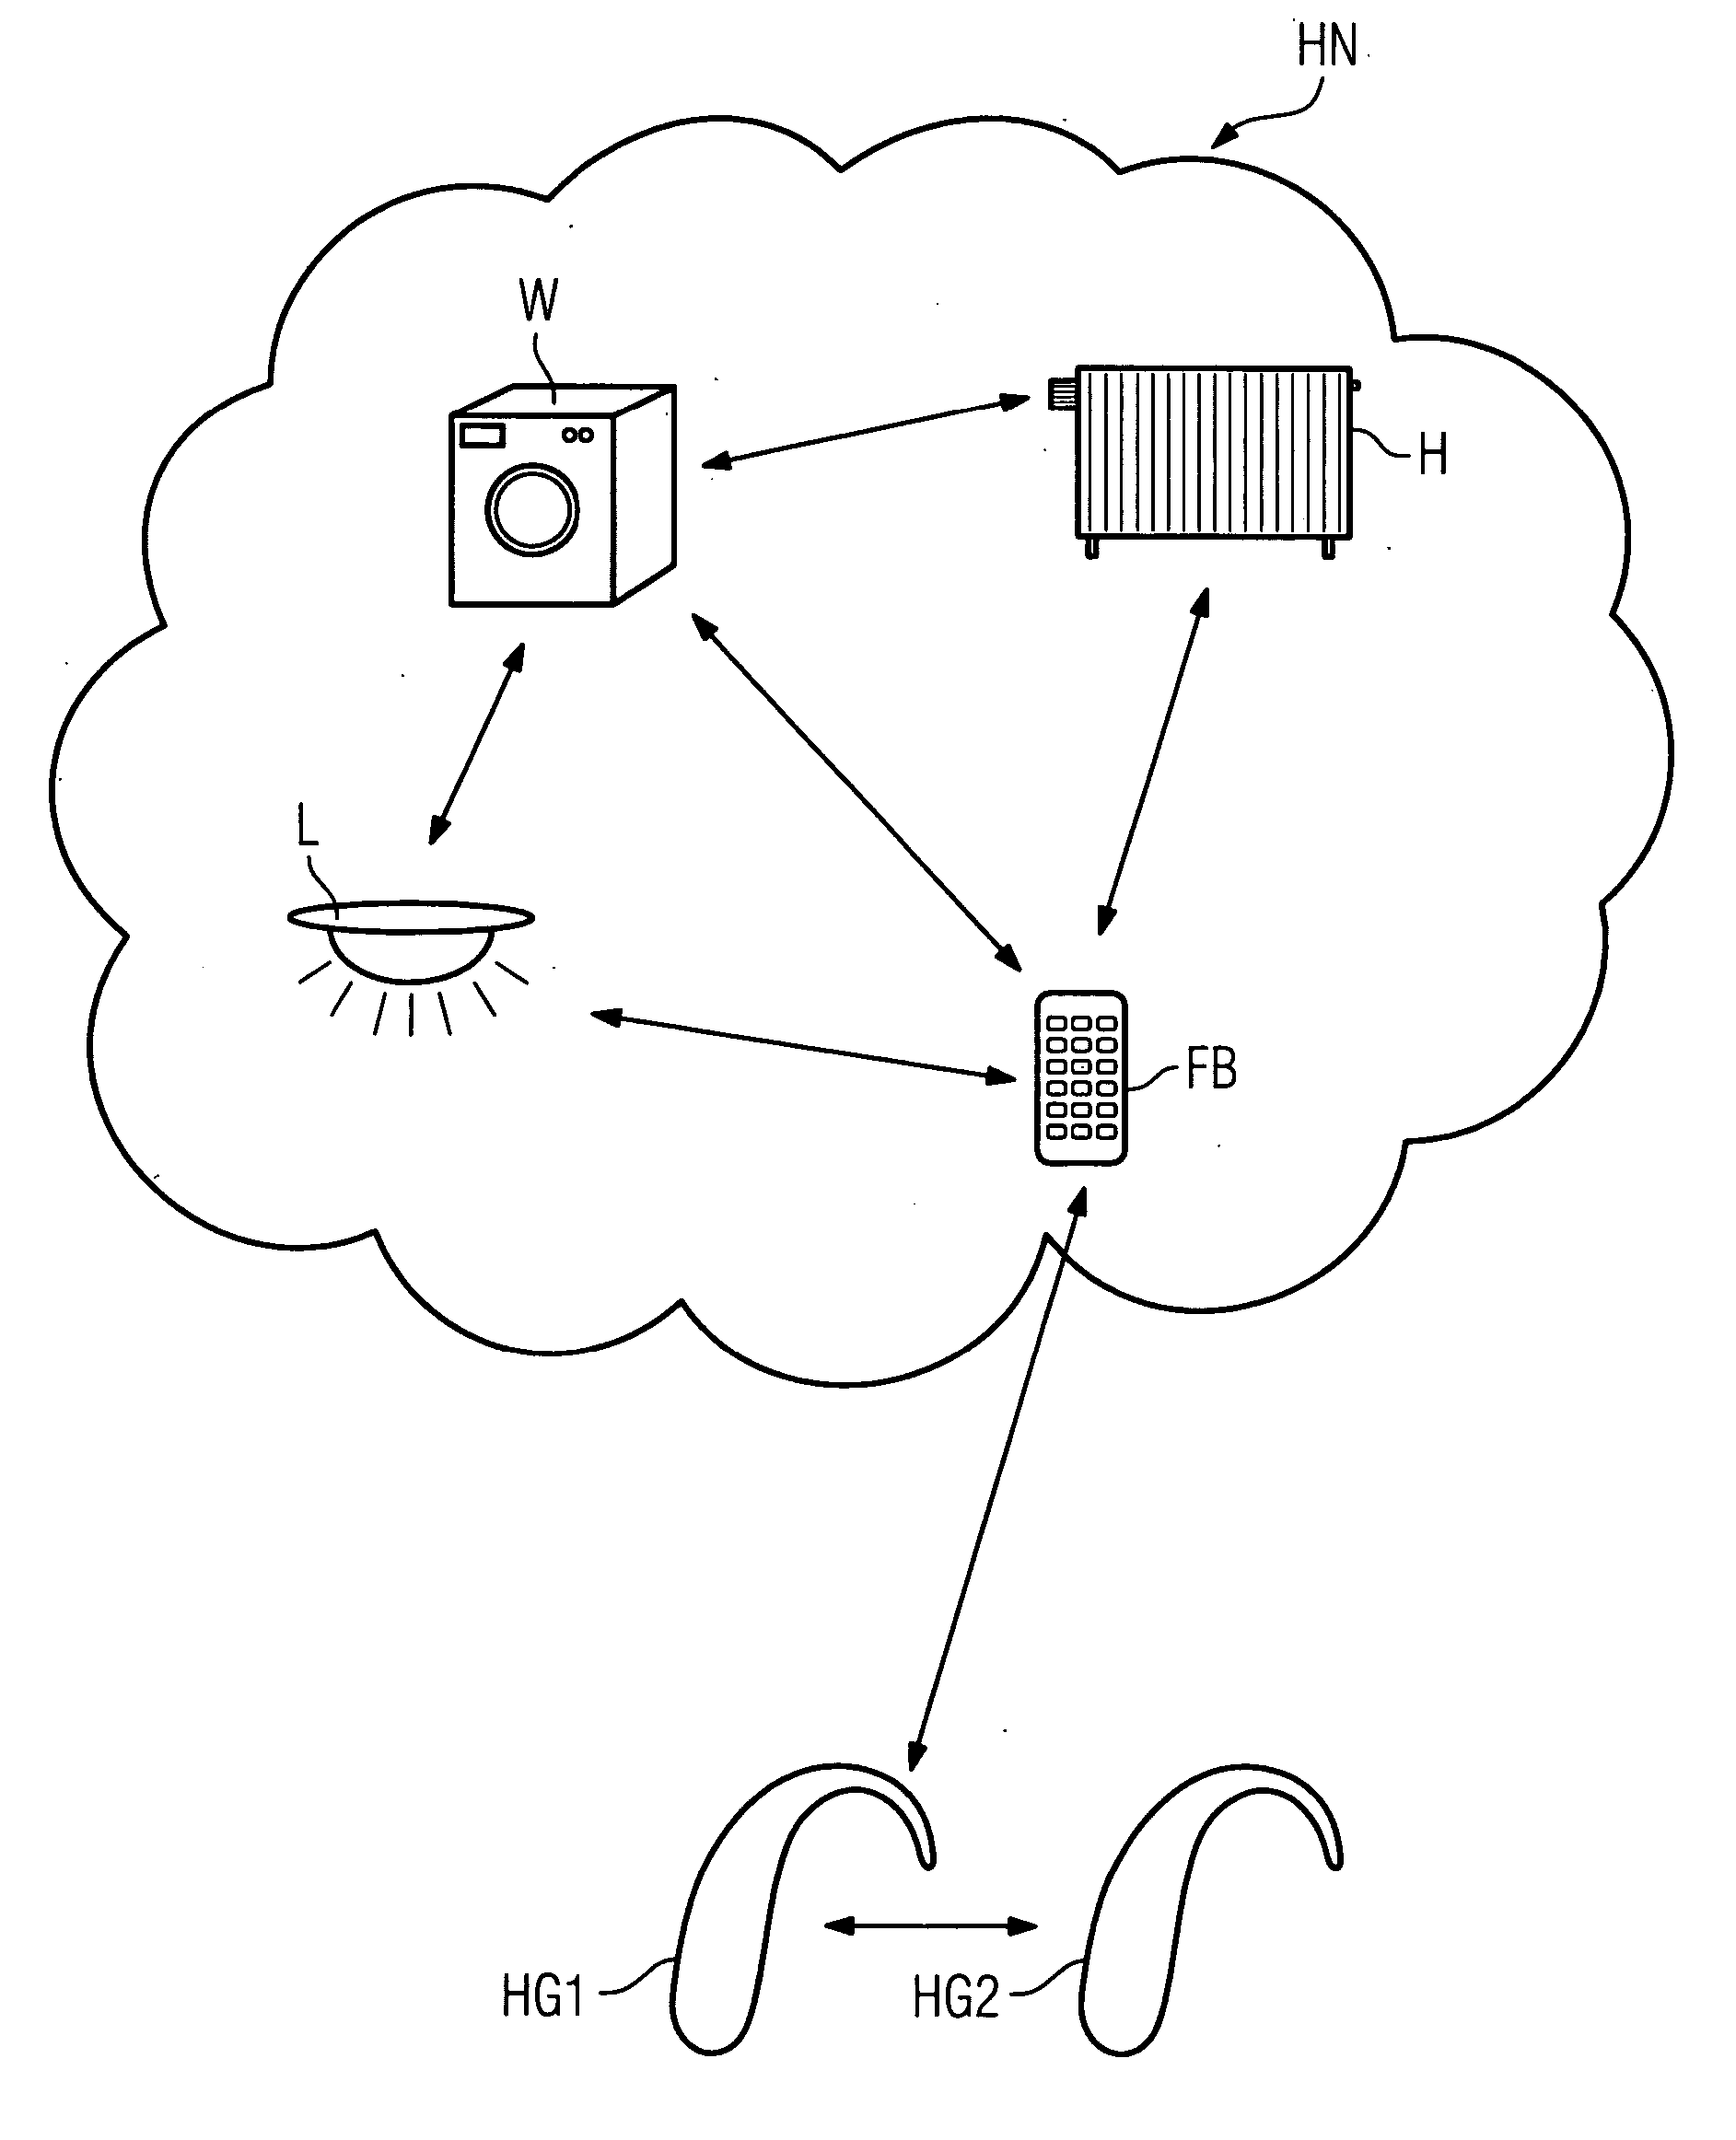 Hearing device remote control unit as a network component and corresponding use thereof